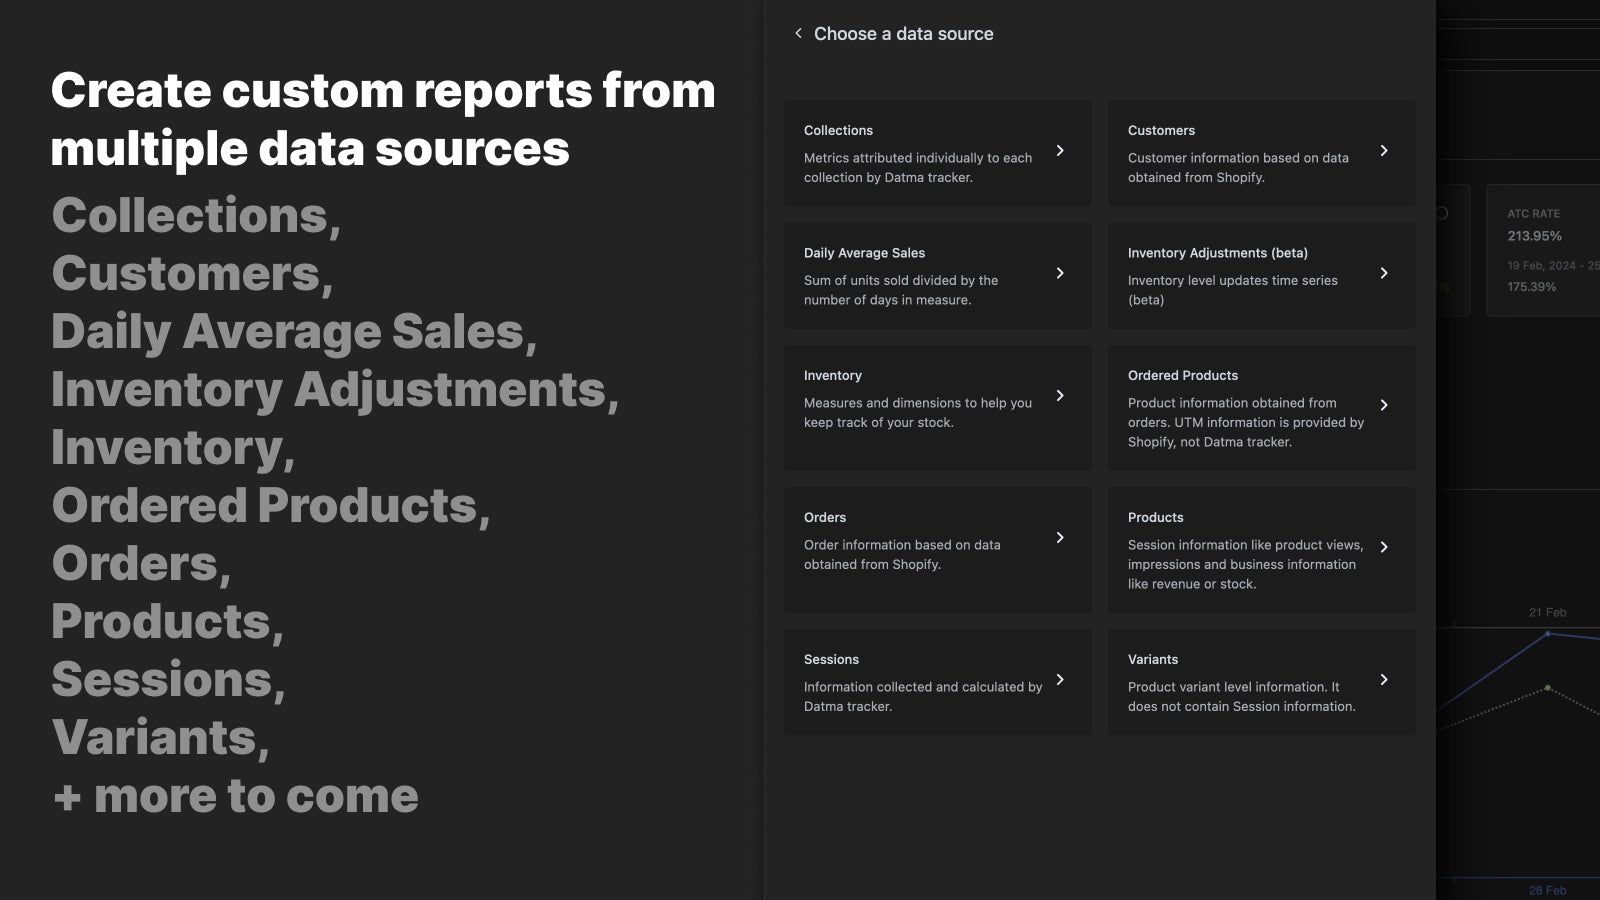 Multiple data sources for custom reports